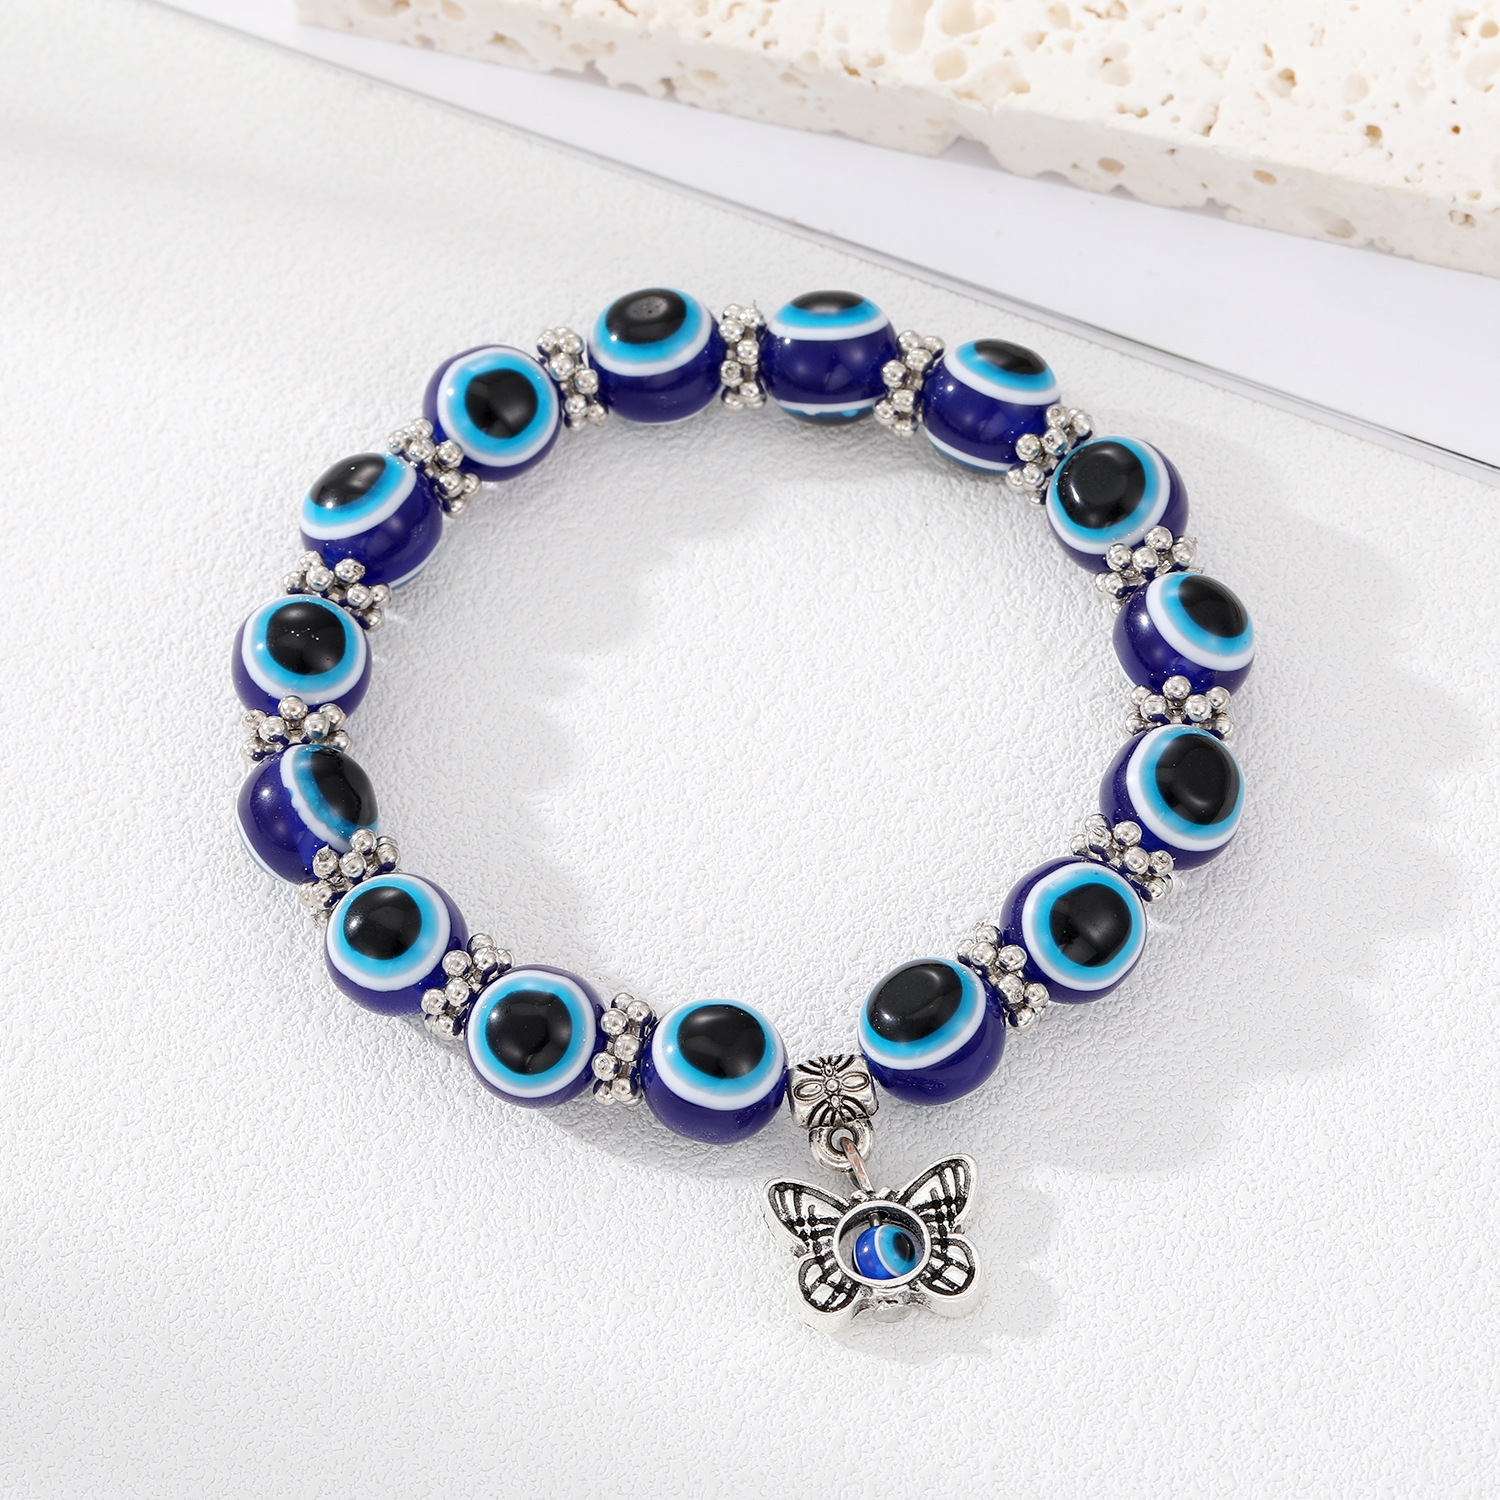 5:Blue butterfly bracelet with large beads